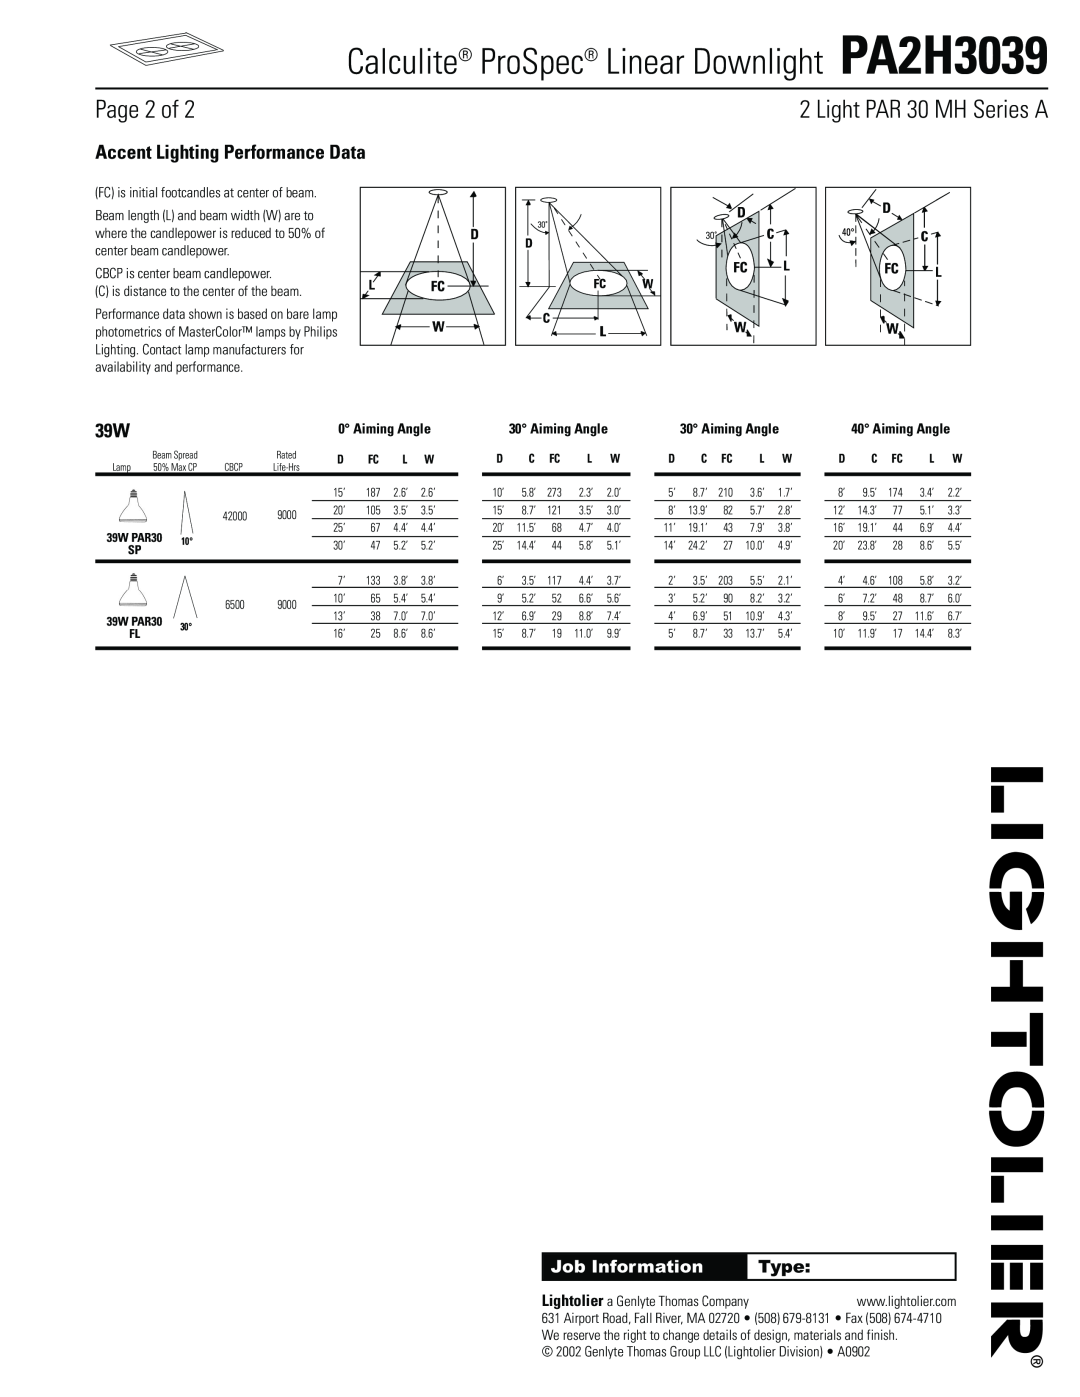 Lightolier Page 2 of, Accent Lighting Performance Data, Calculite ProSpec Linear Downlight PA2H3039, Job Information 